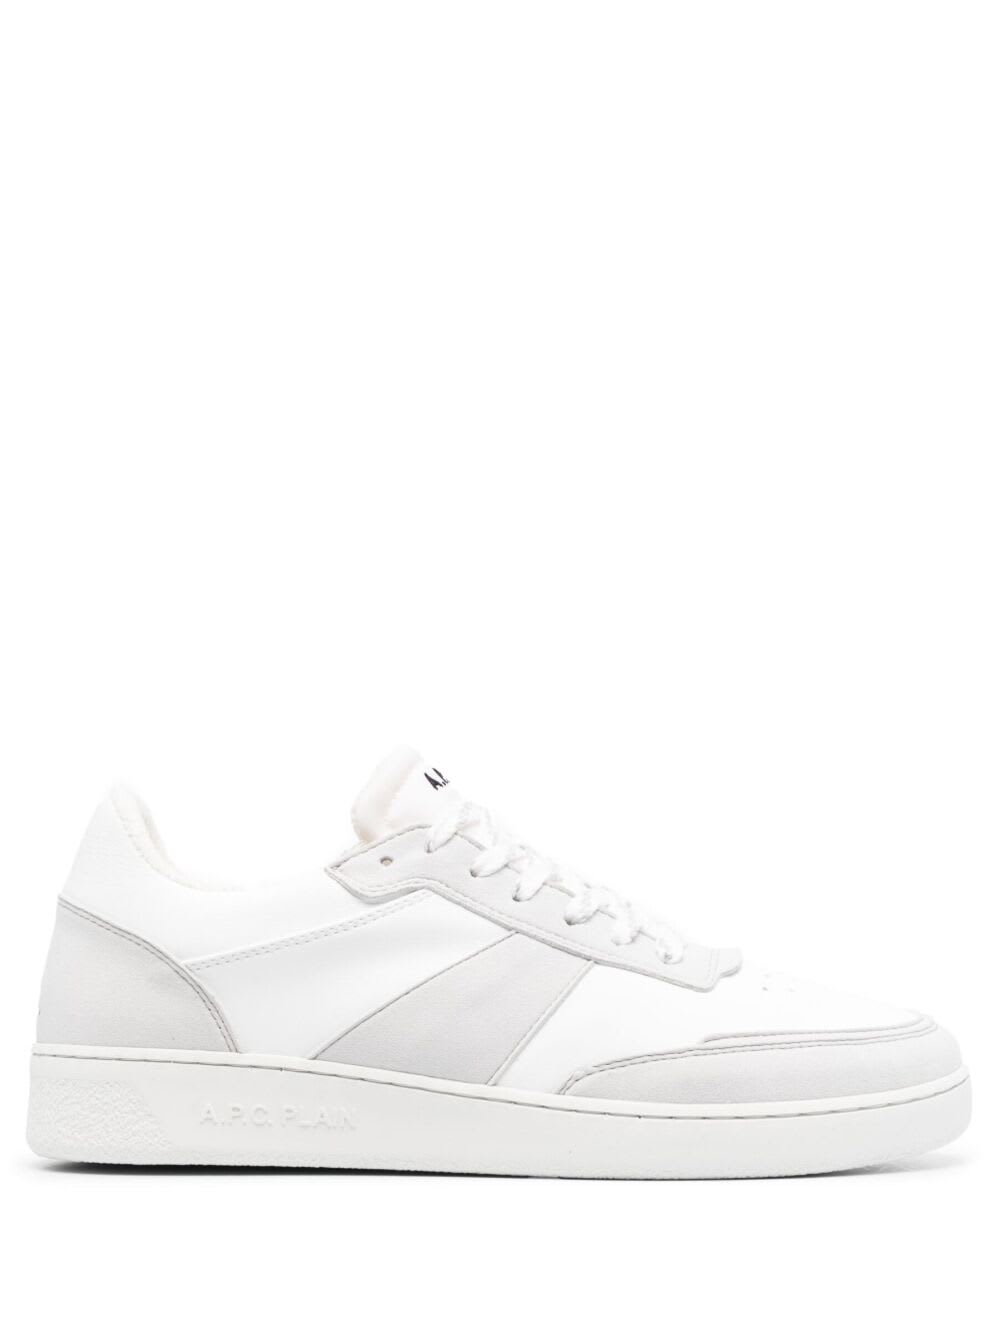 APC WHITE LOW TOP SNEAKERS WITH EMBOSSED LOGO IN FAUX LEATHER WOMAN